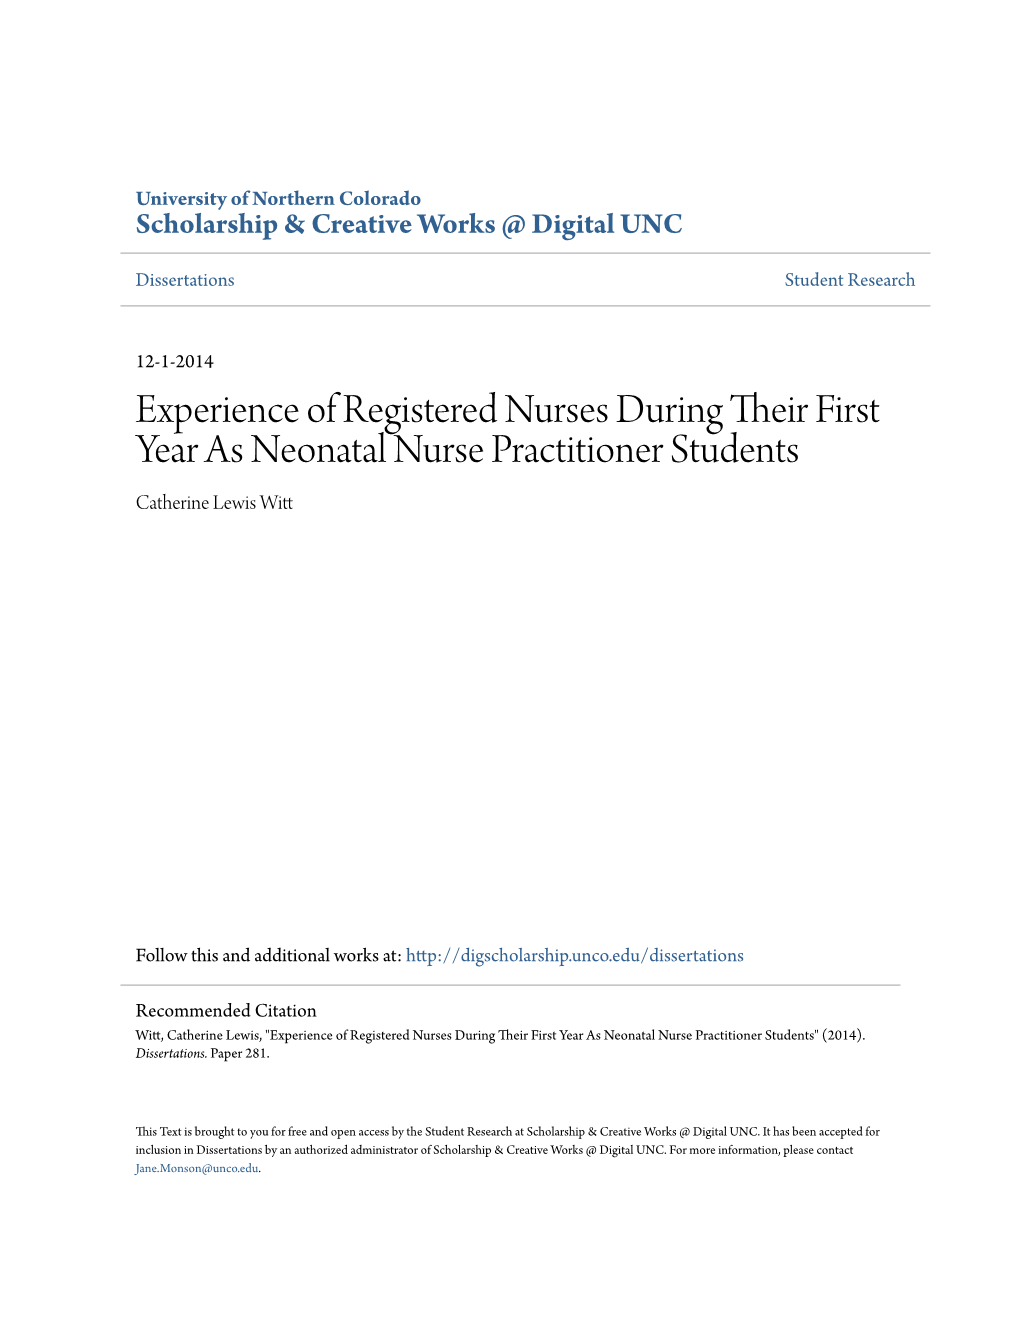 Experience of Registered Nurses During Their First Year As Neonatal Nurse Practitioner Students